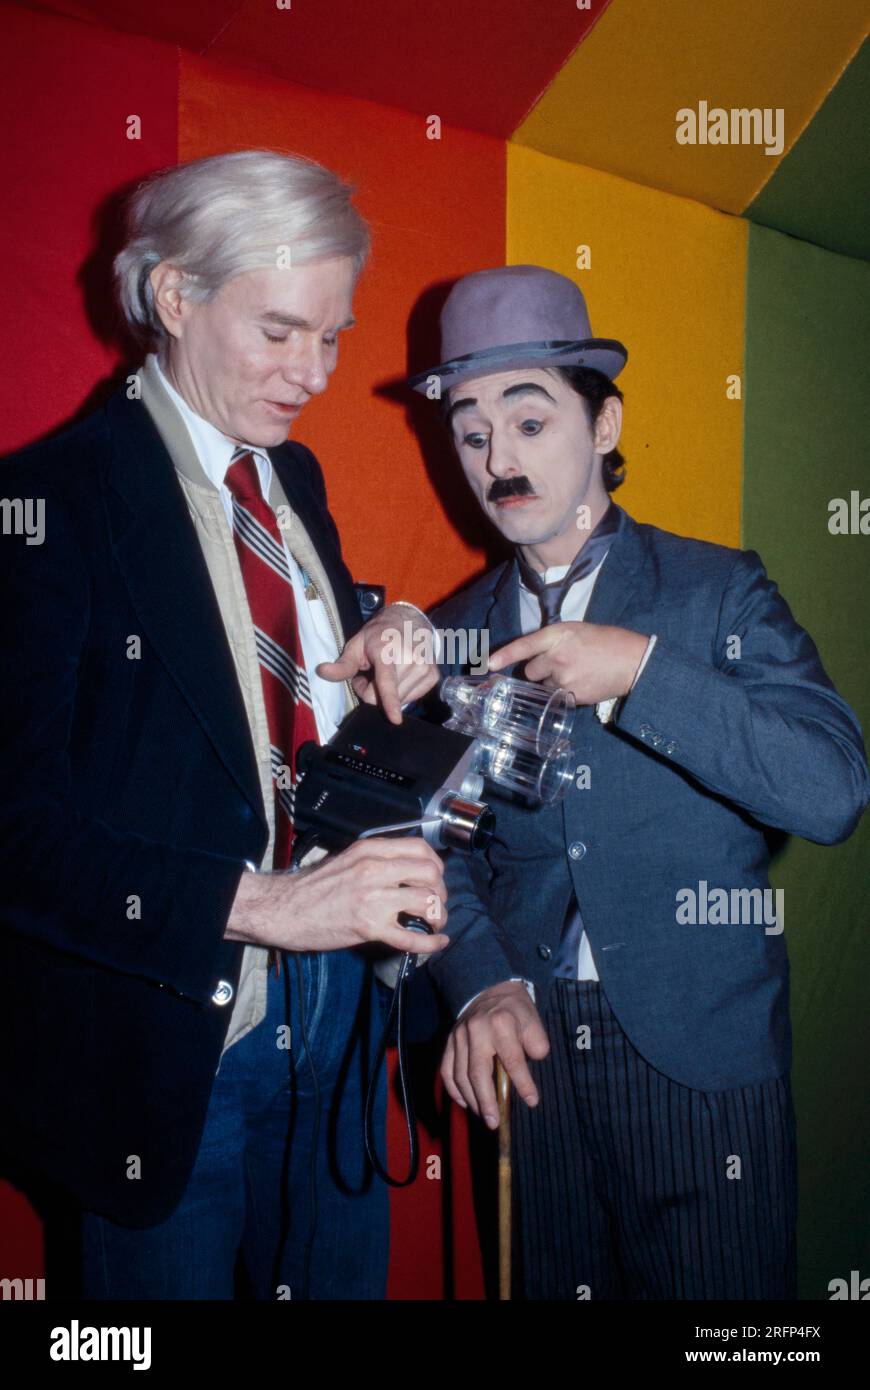 Andy Warhol with new Polaroid Polavision movie camera at an art opening in 1977. Warhol was an American visual artist, film director, producer, and leading figure in the pop art movement. His works explore the relationship between artistic expression, advertising, and celebrity culture that flourished by the 1960s, and span a variety of media, including painting, silkscreening, photography, film, and sculpture. Some of his best-known works include the silkscreen paintings Campbell's Soup Cans  and Marilyn Diptych. Photo by Bernard Gotfryd Stock Photo